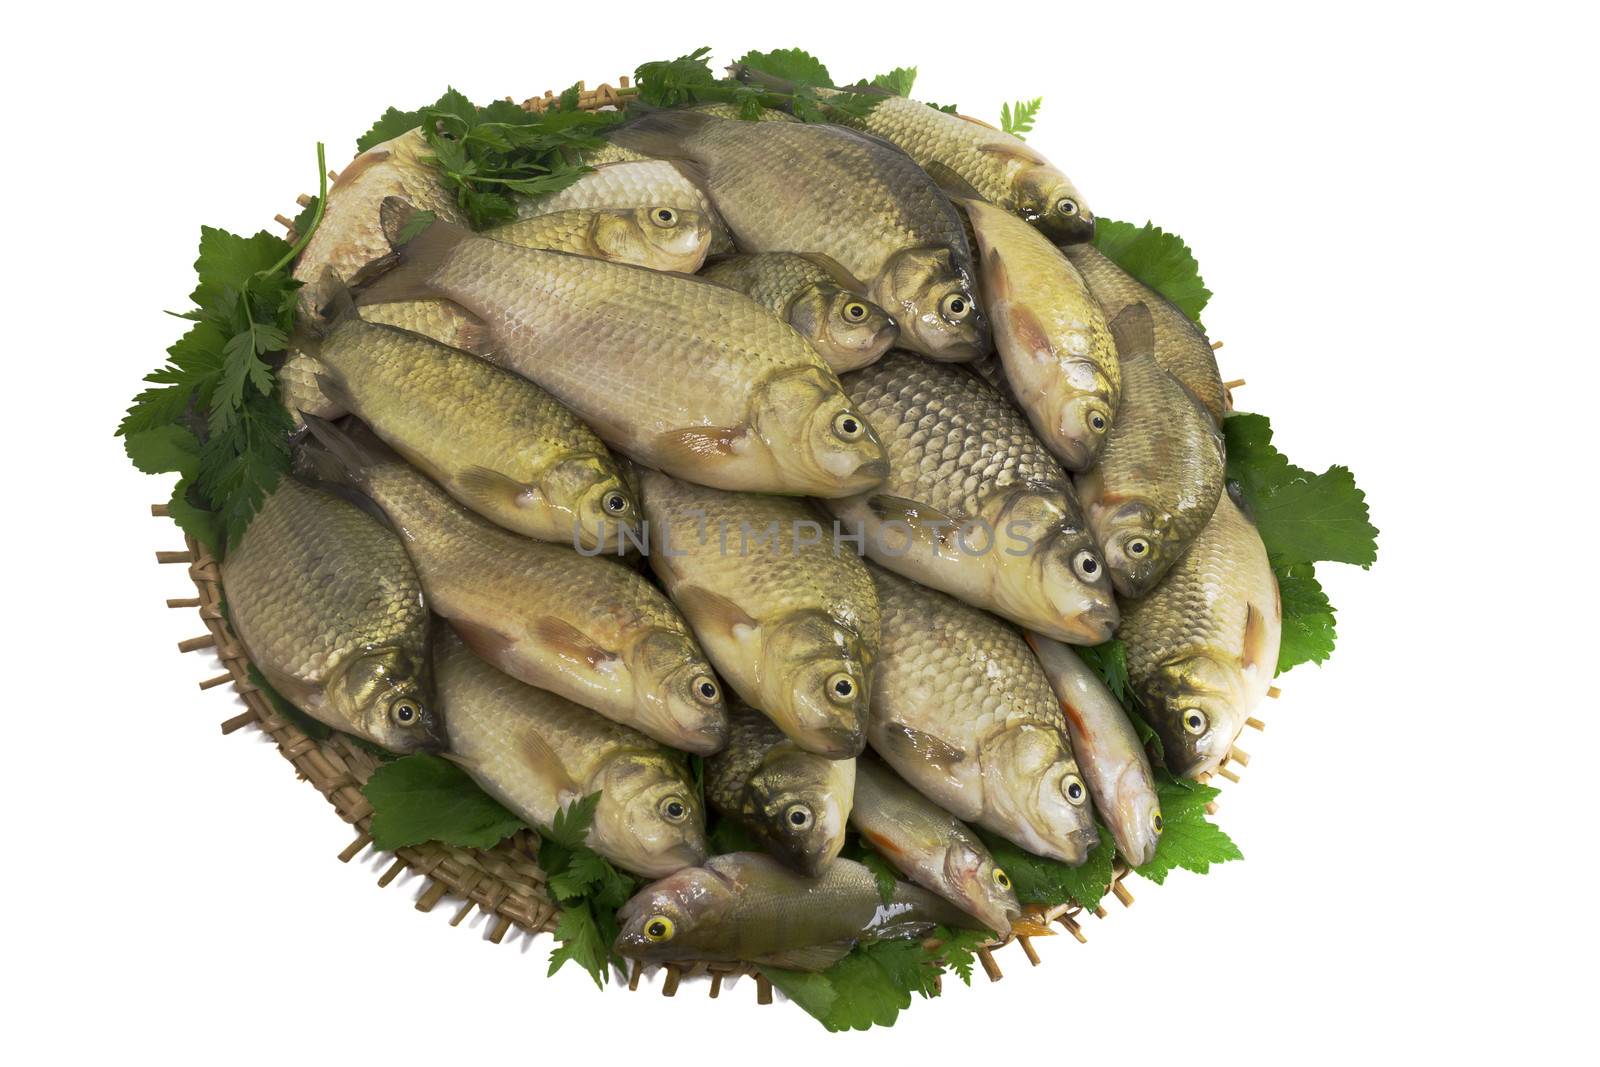 River fish (carp) and the greens on a round dish. by georgina198